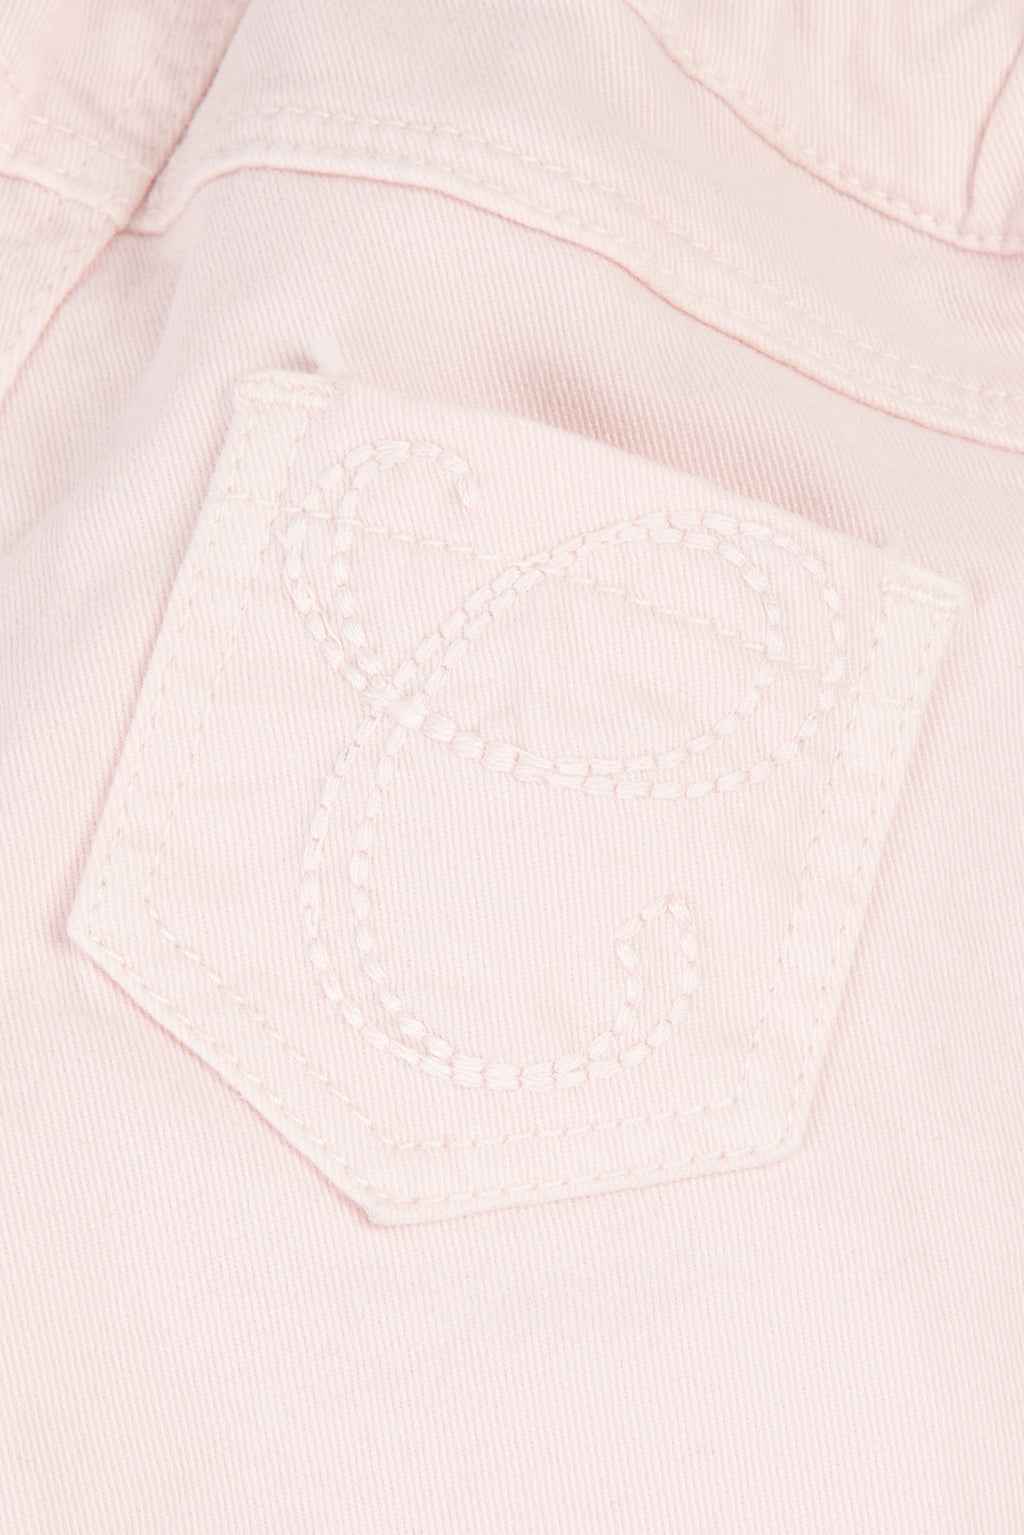 Jeans - Pink Embrodery Tc